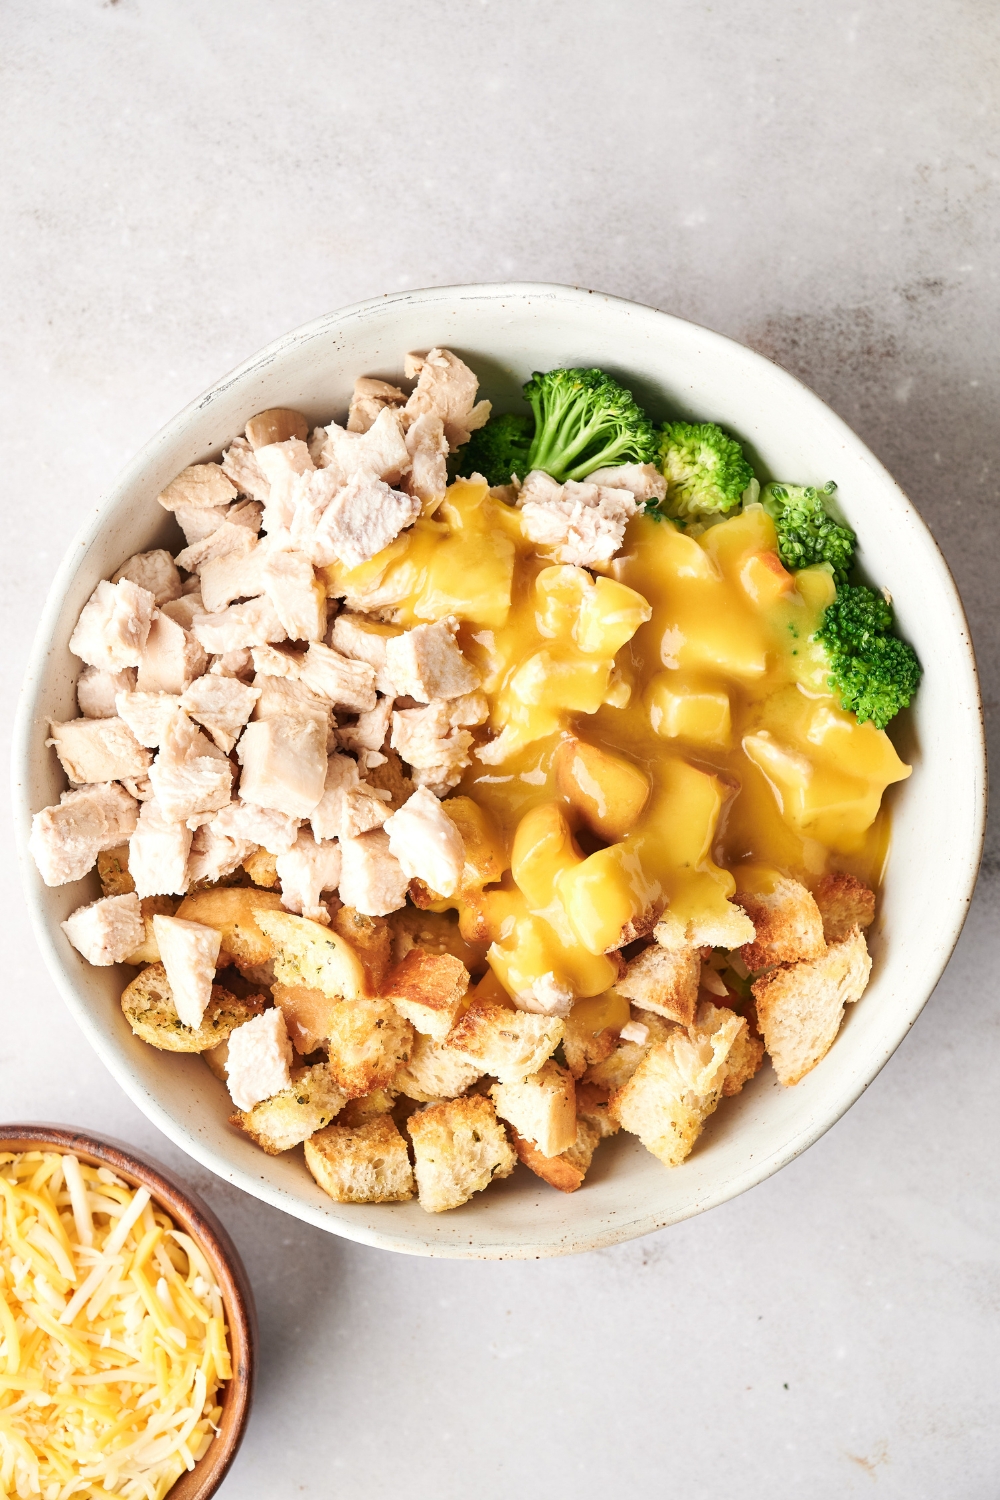 Diced chicken, stuffing, chicken soup, and broccoli are in a white mixing bowl. A bowl of shredded cheese is nearby.